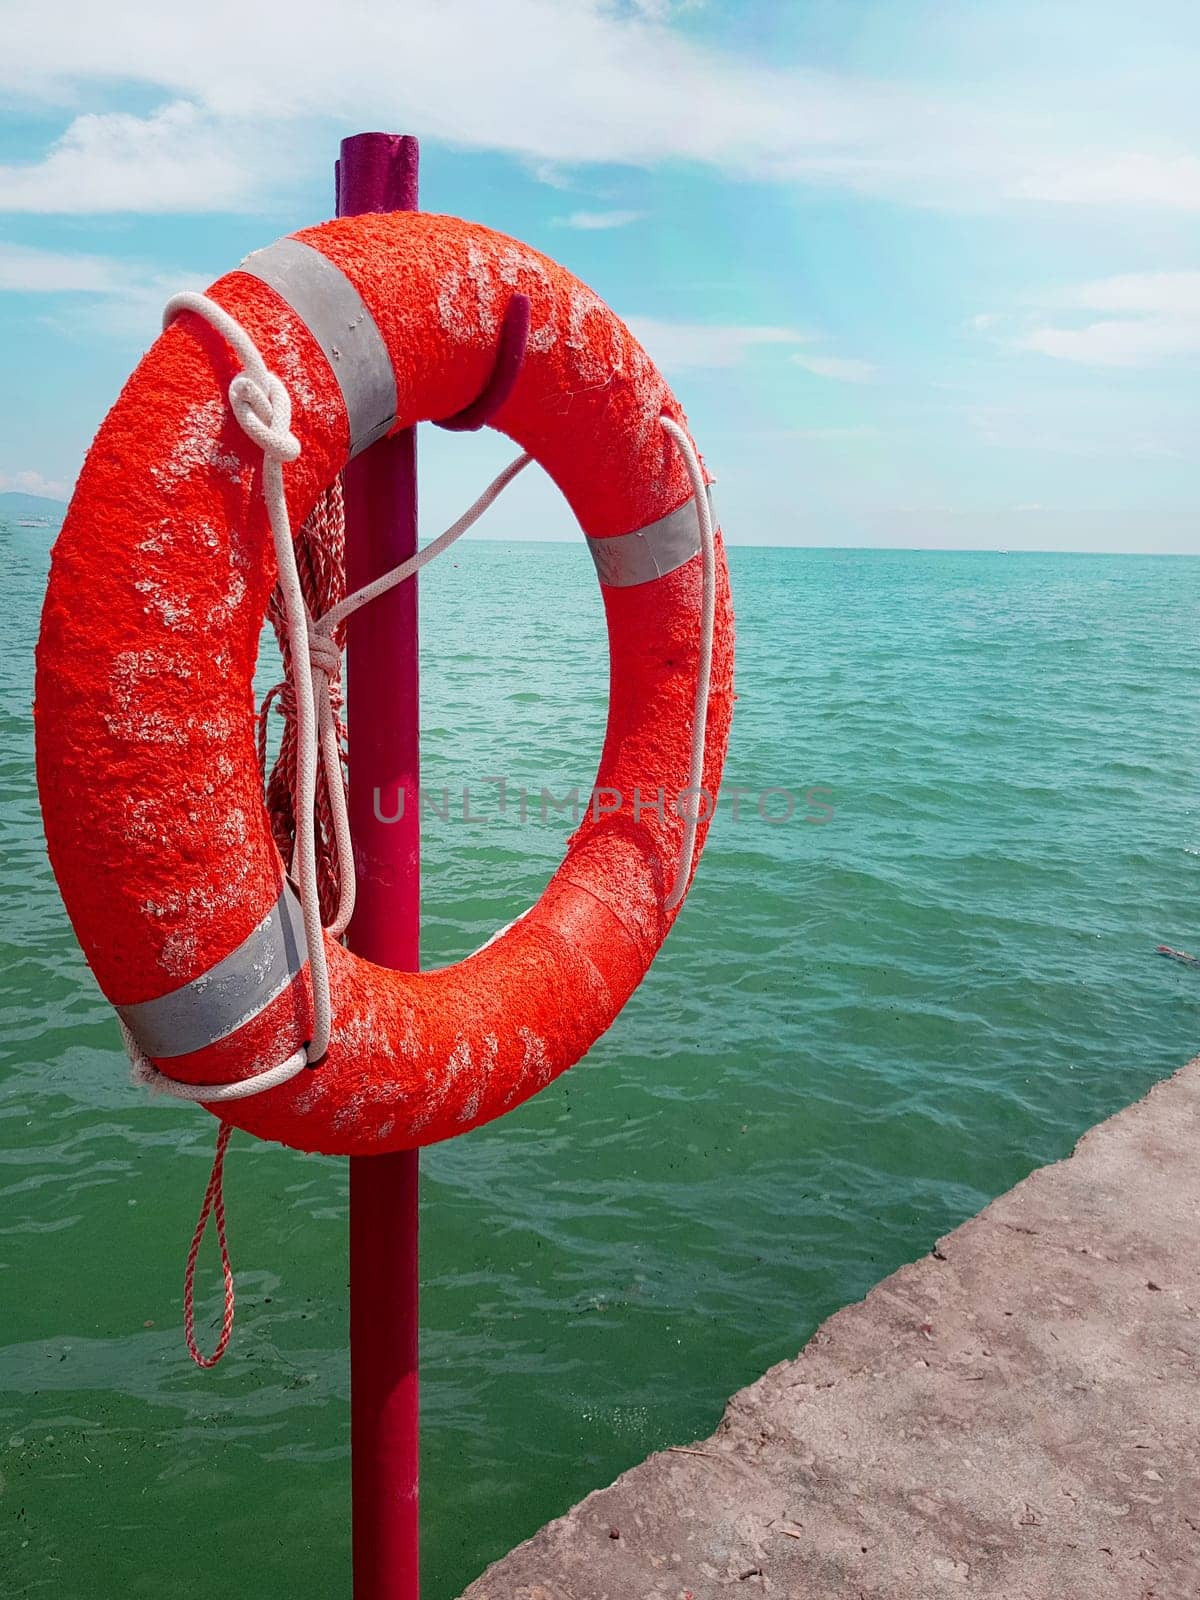 Lifebuoy on the background of the azure sea, sea pier in the sea, close-up, vertical by claire_lucia